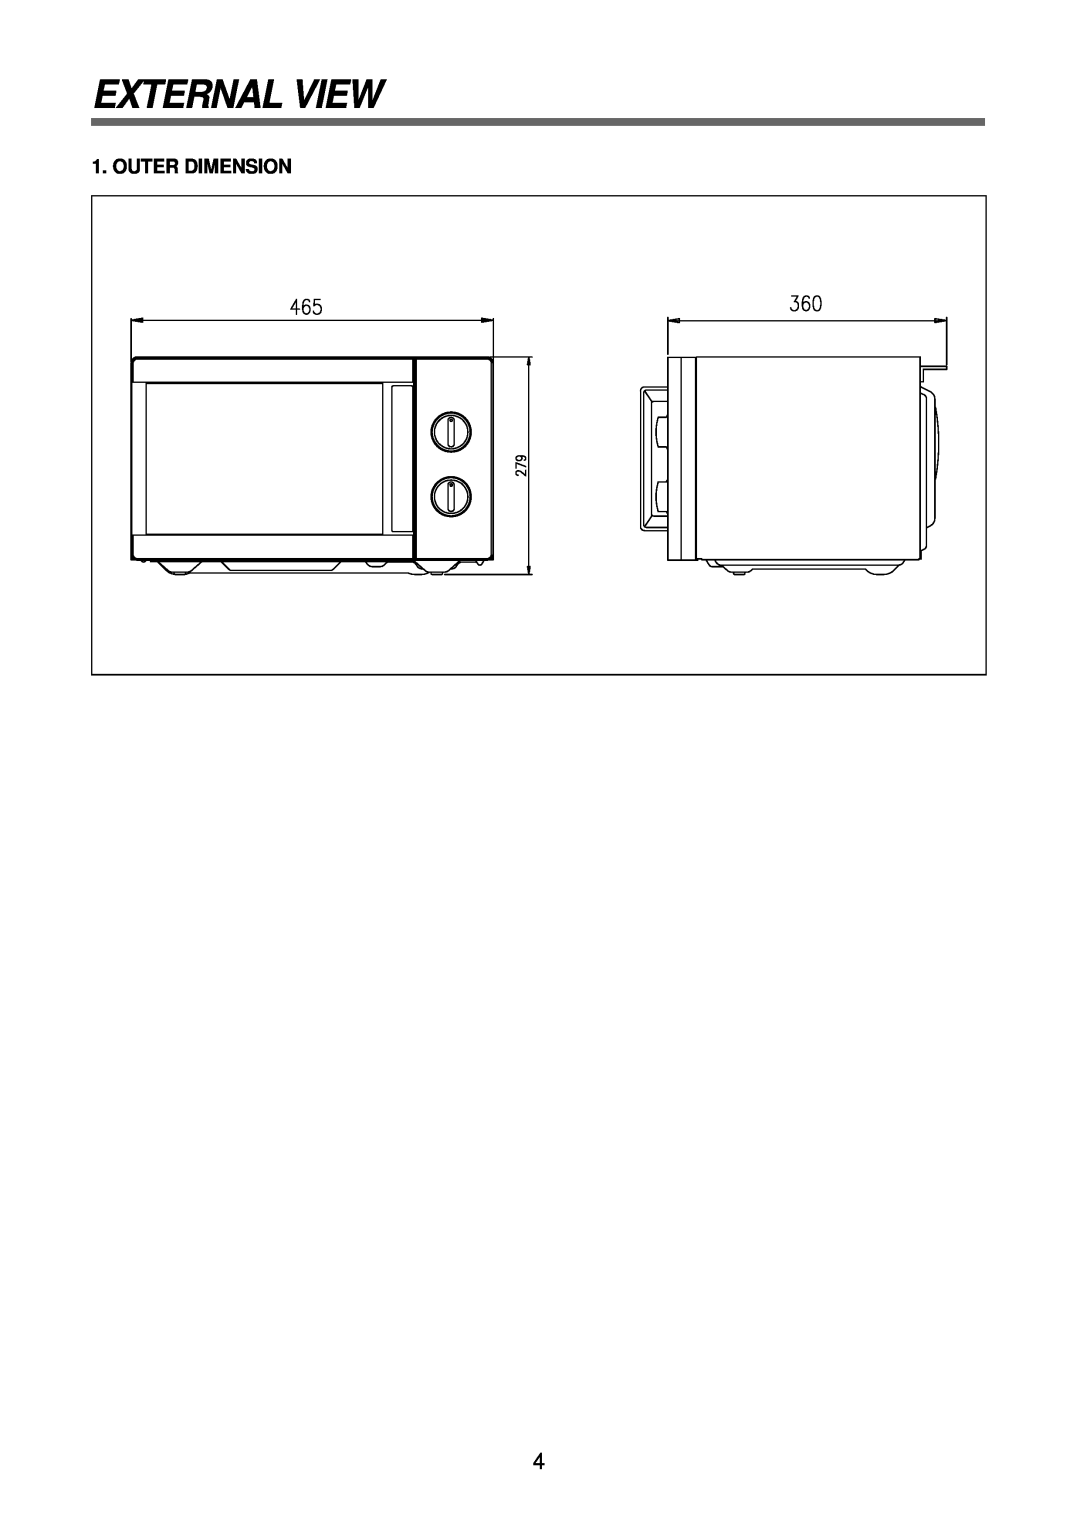 Daewoo KOR-6N575S, Microwave Oven service manual External View, Outer Dimension 